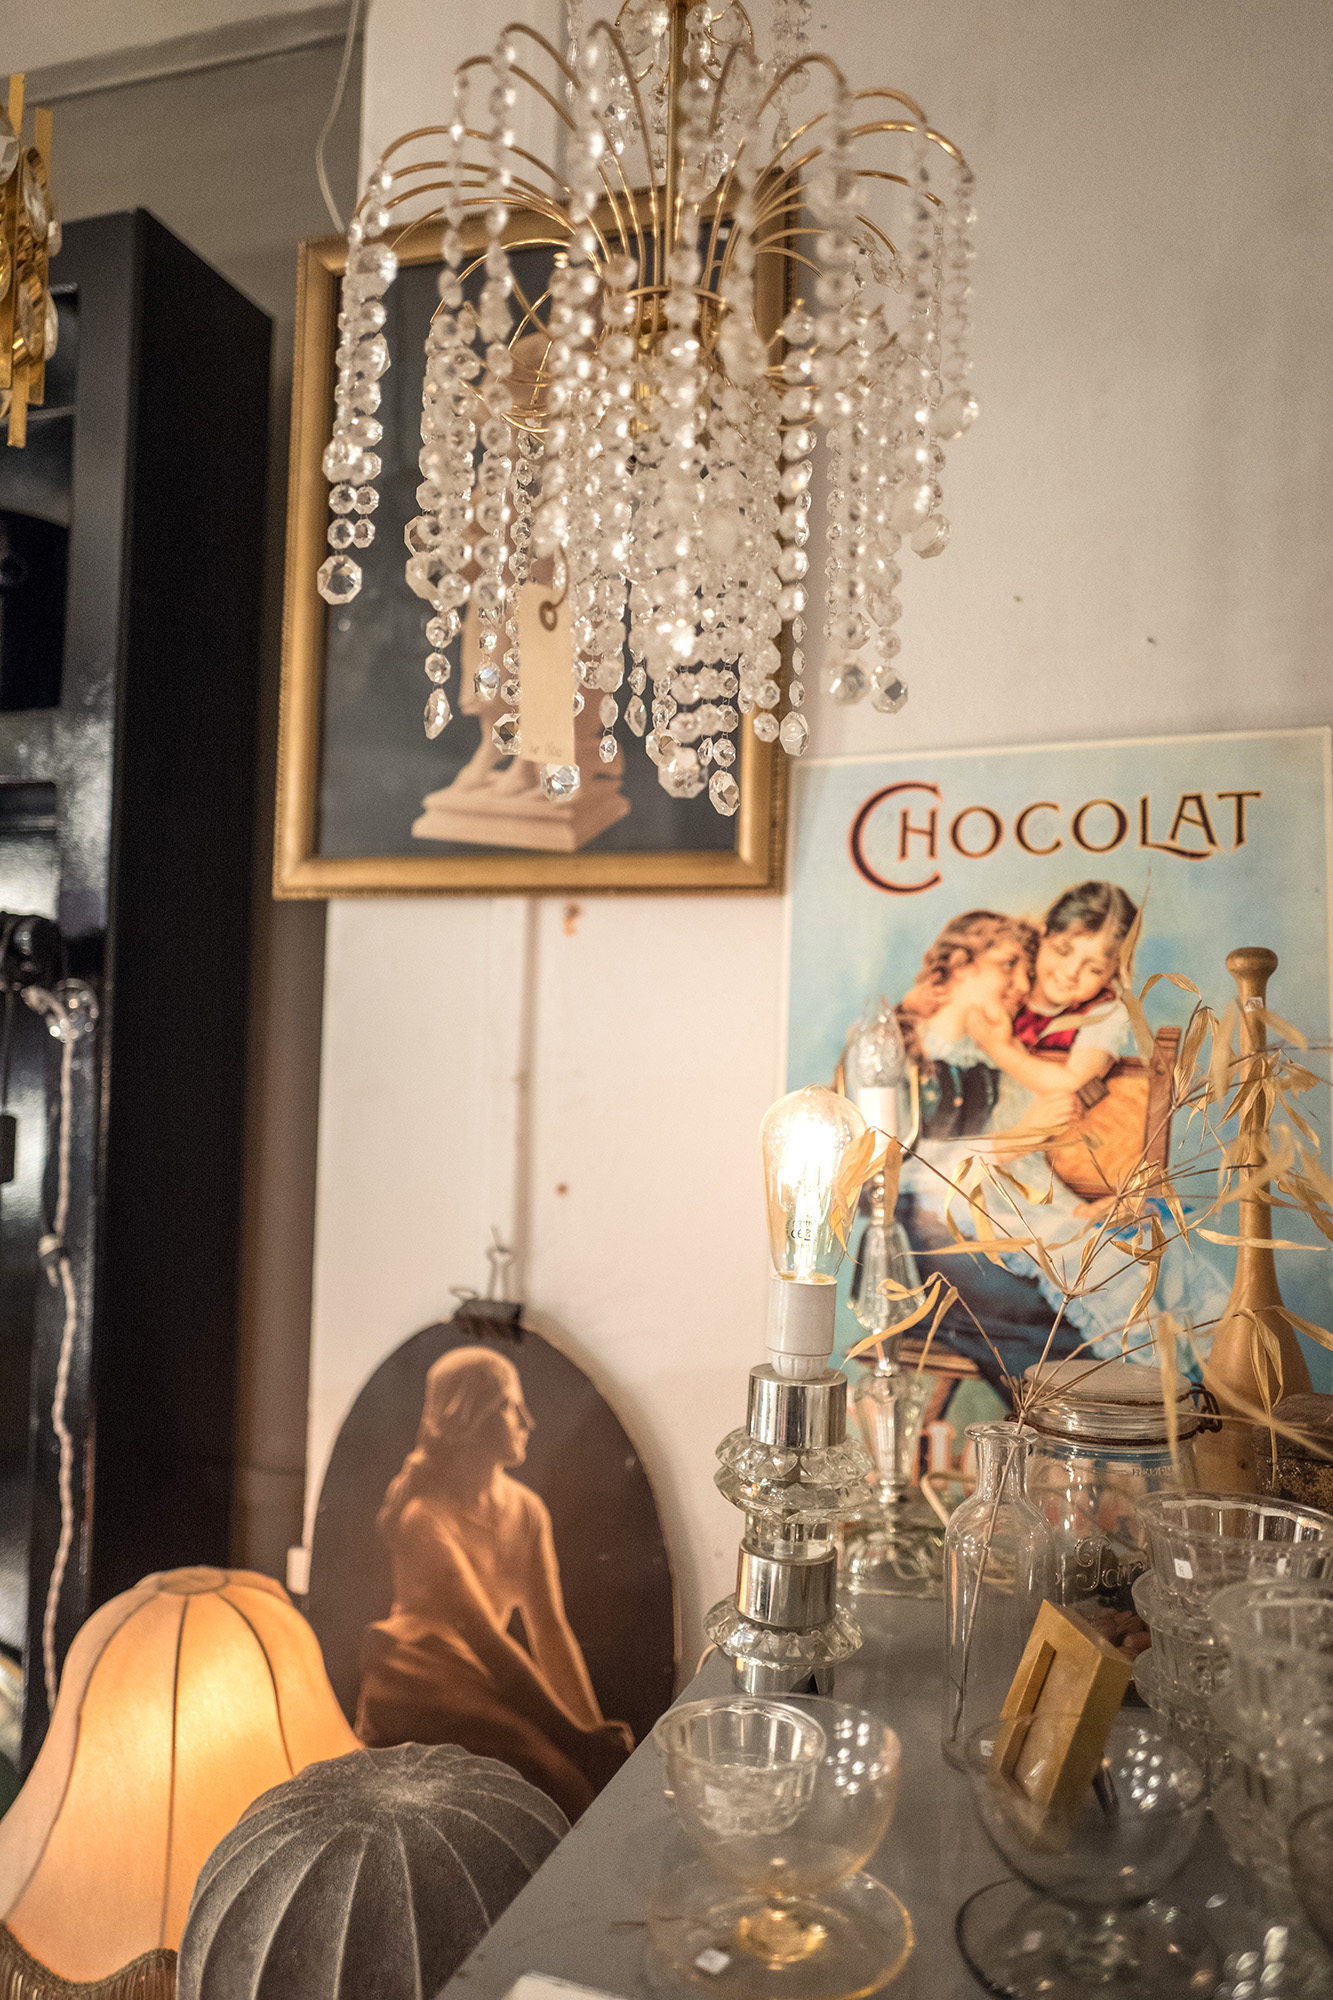 Fransk Bazar, vintage store in Oslo - Instagrammer's guide to Oslo - 91 Magazine